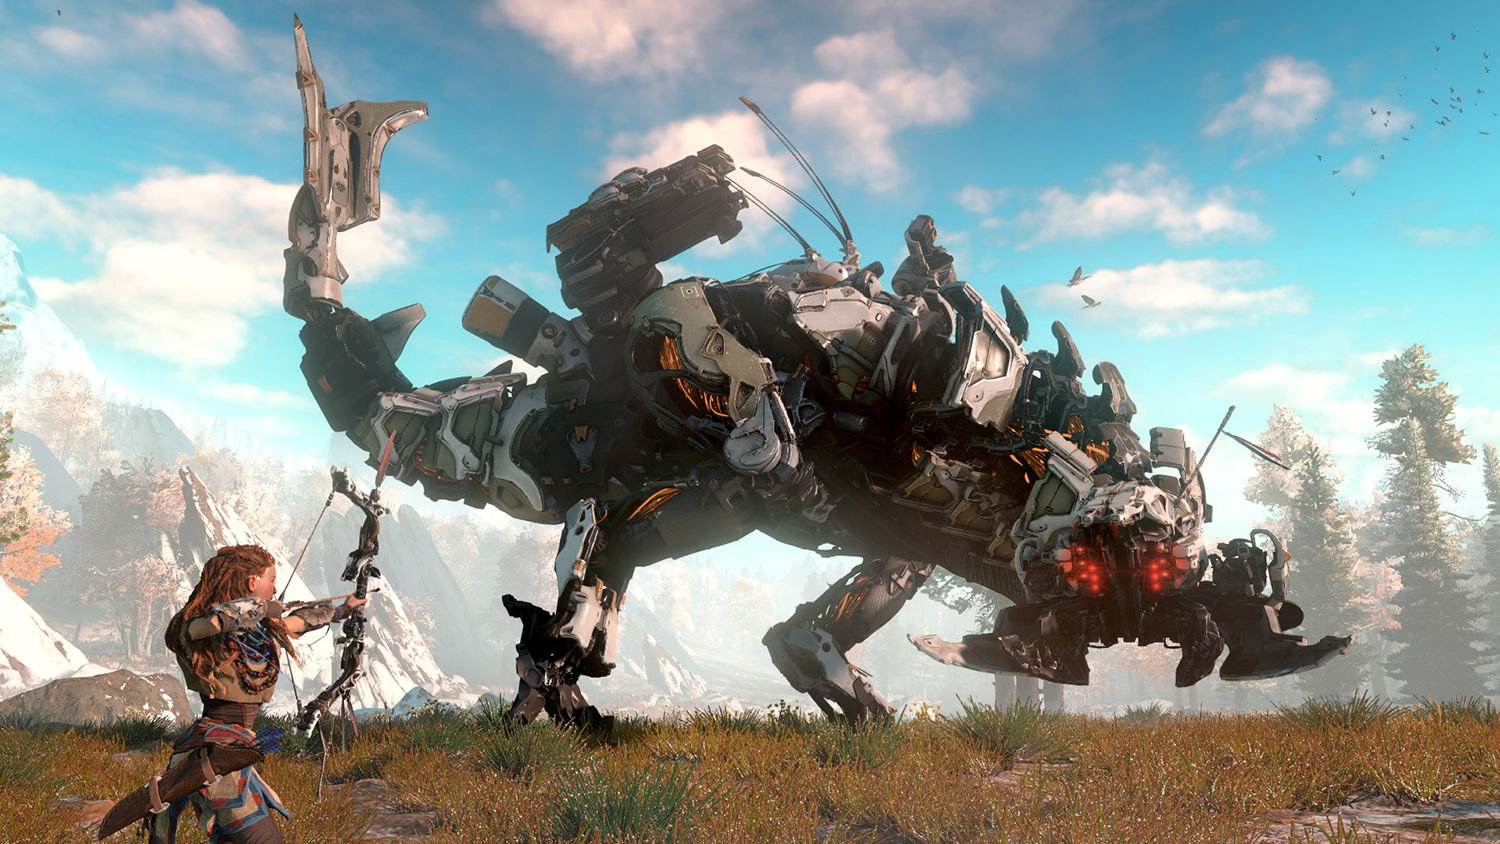 Horizon: Zero Dawn' review: An exhilarating game unlike any other